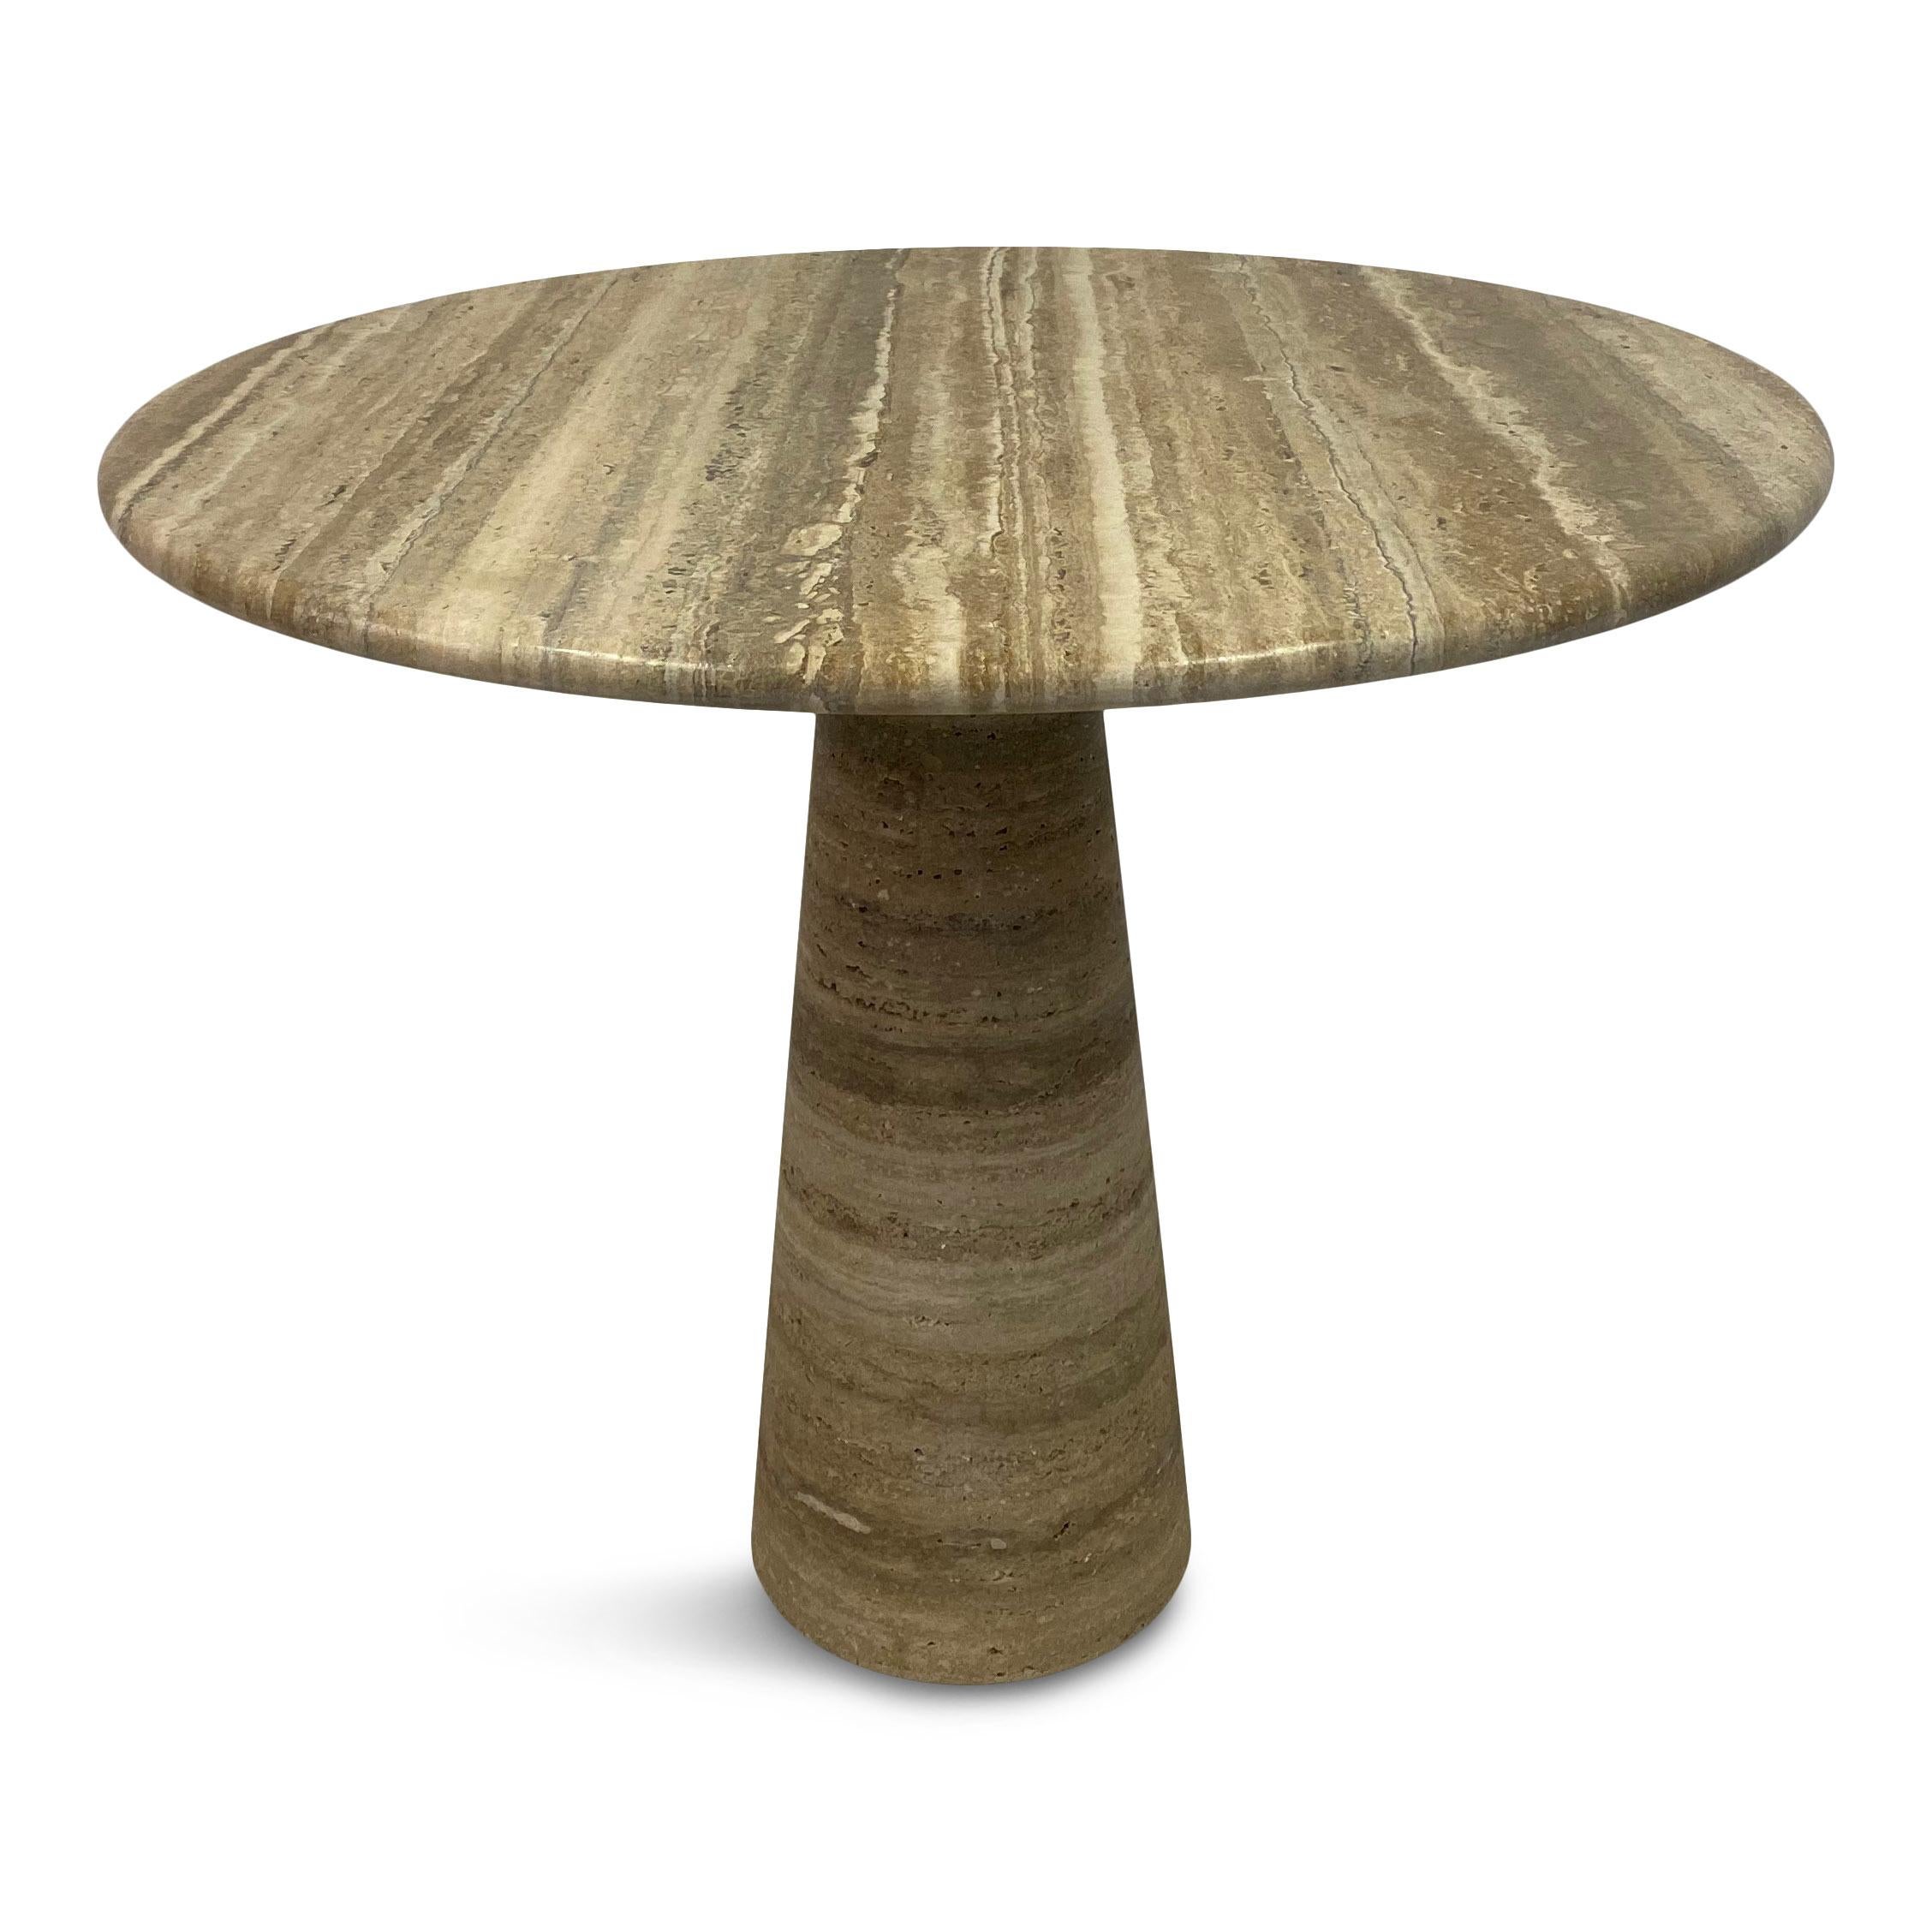 Round centre table.

Darker grained travertine

Tapering conical base

Rounded edges

Made to order in Italy

Size can be customised